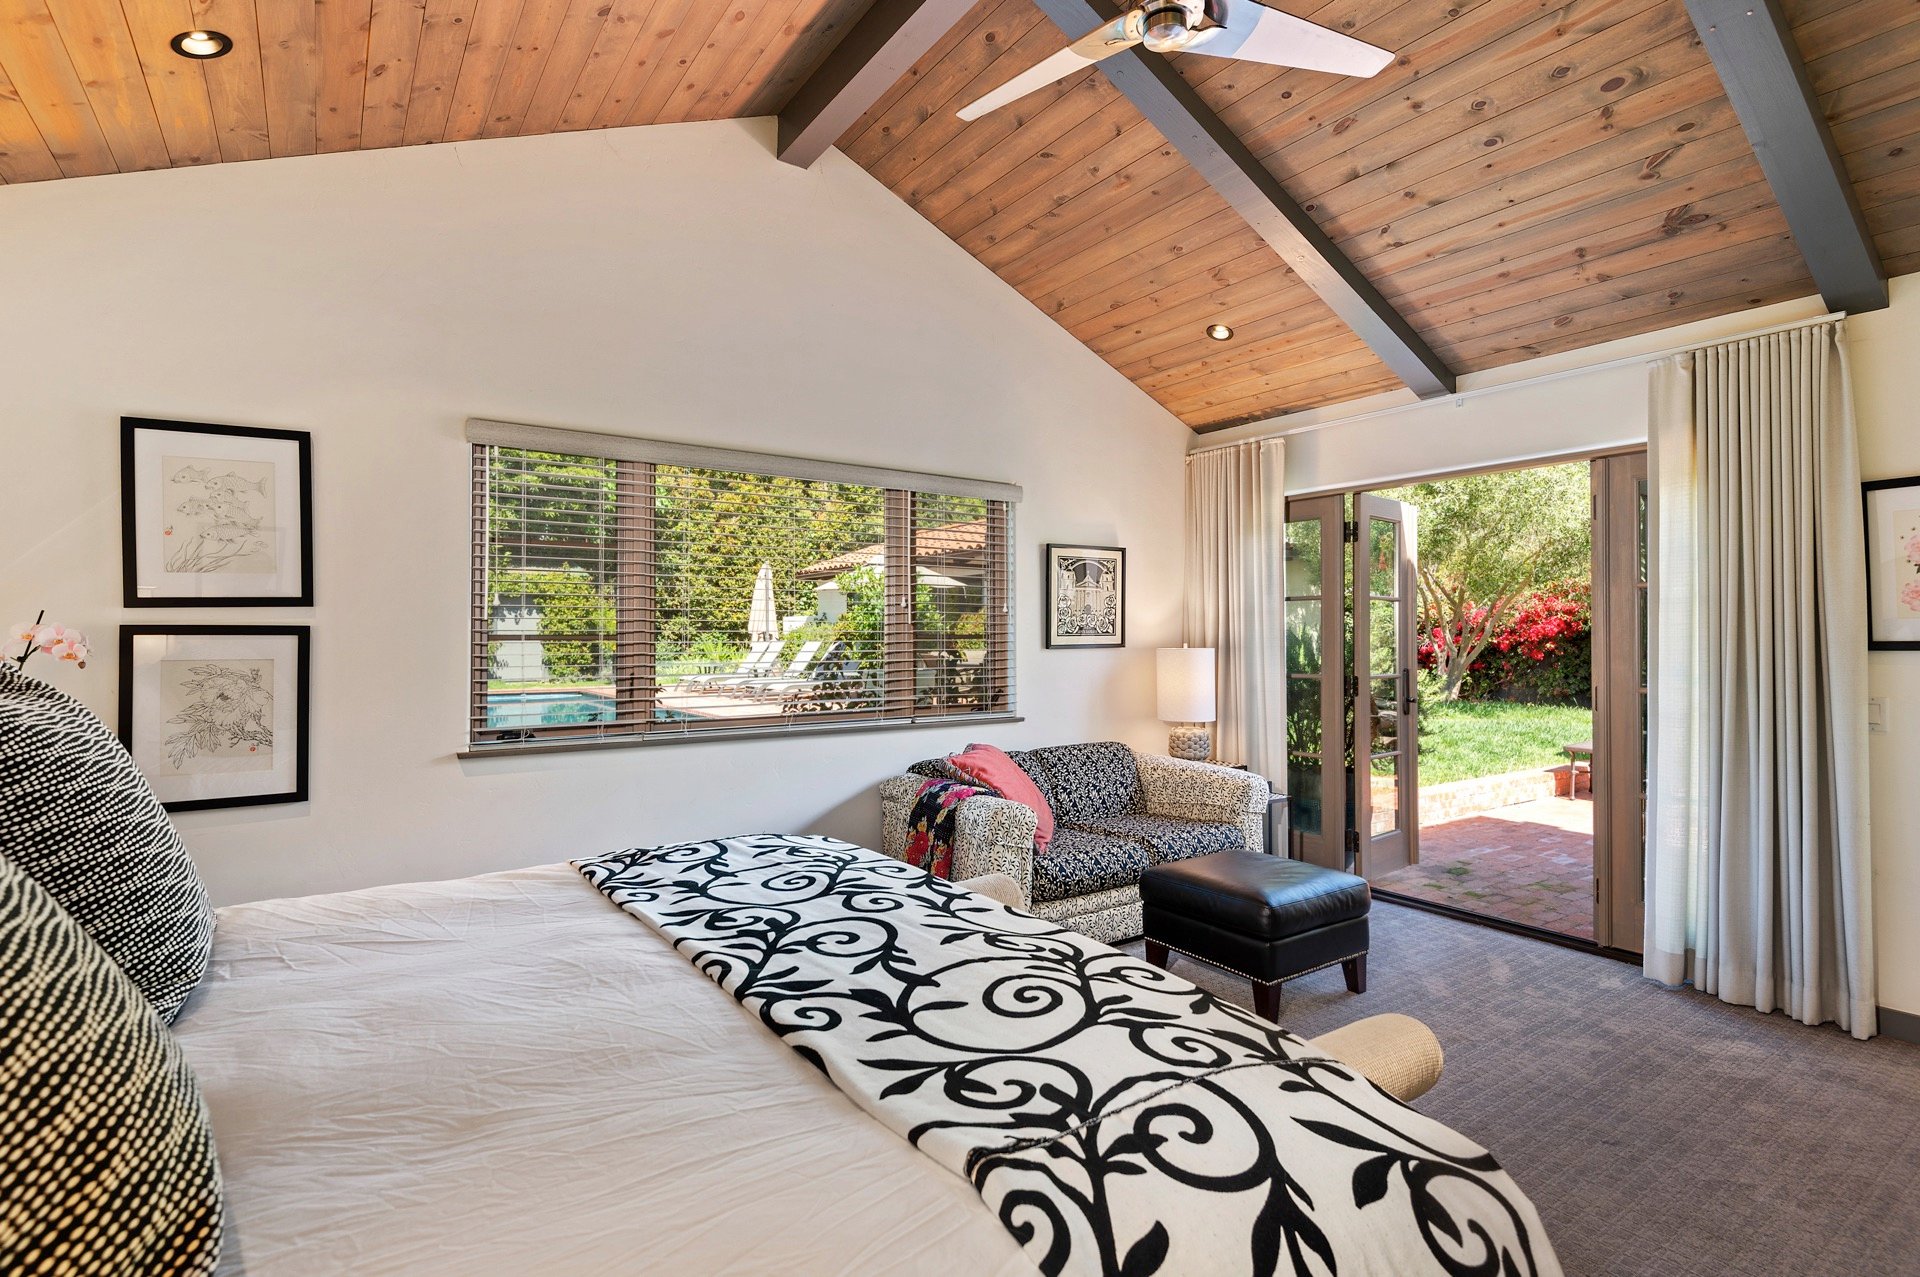 The master suite has a sliding door with curtains that lead to the backyard pool area.